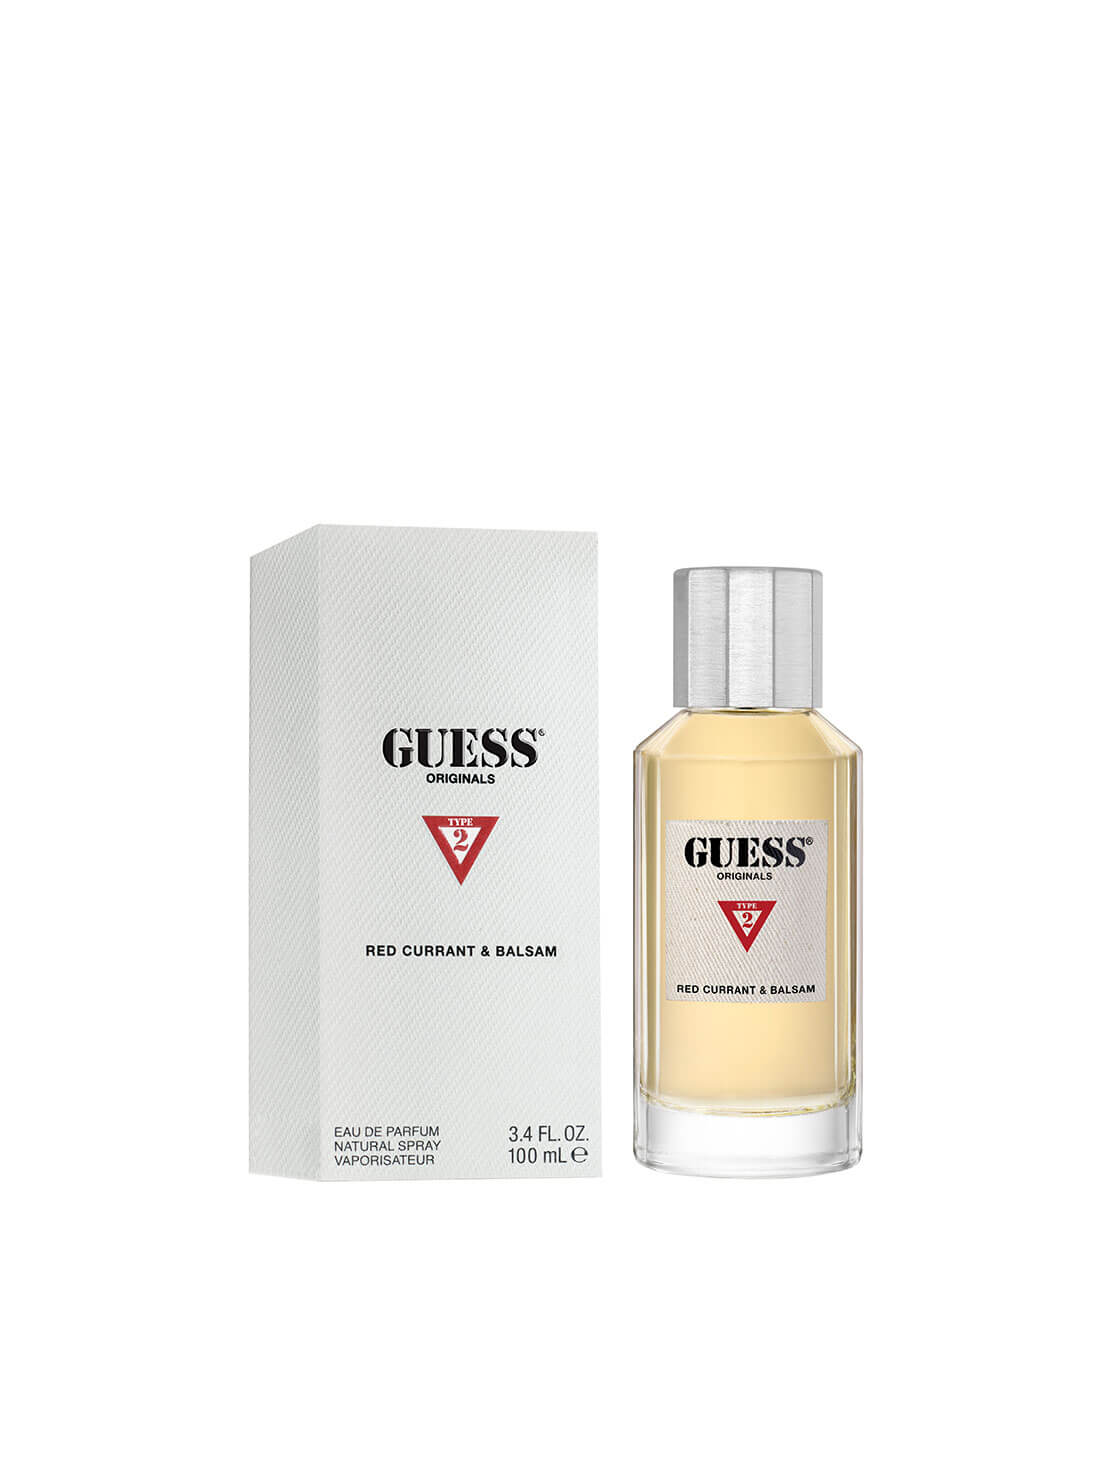 Guess Originals Type 2 Fragrance 100ML | GUESS Accessories | Front view